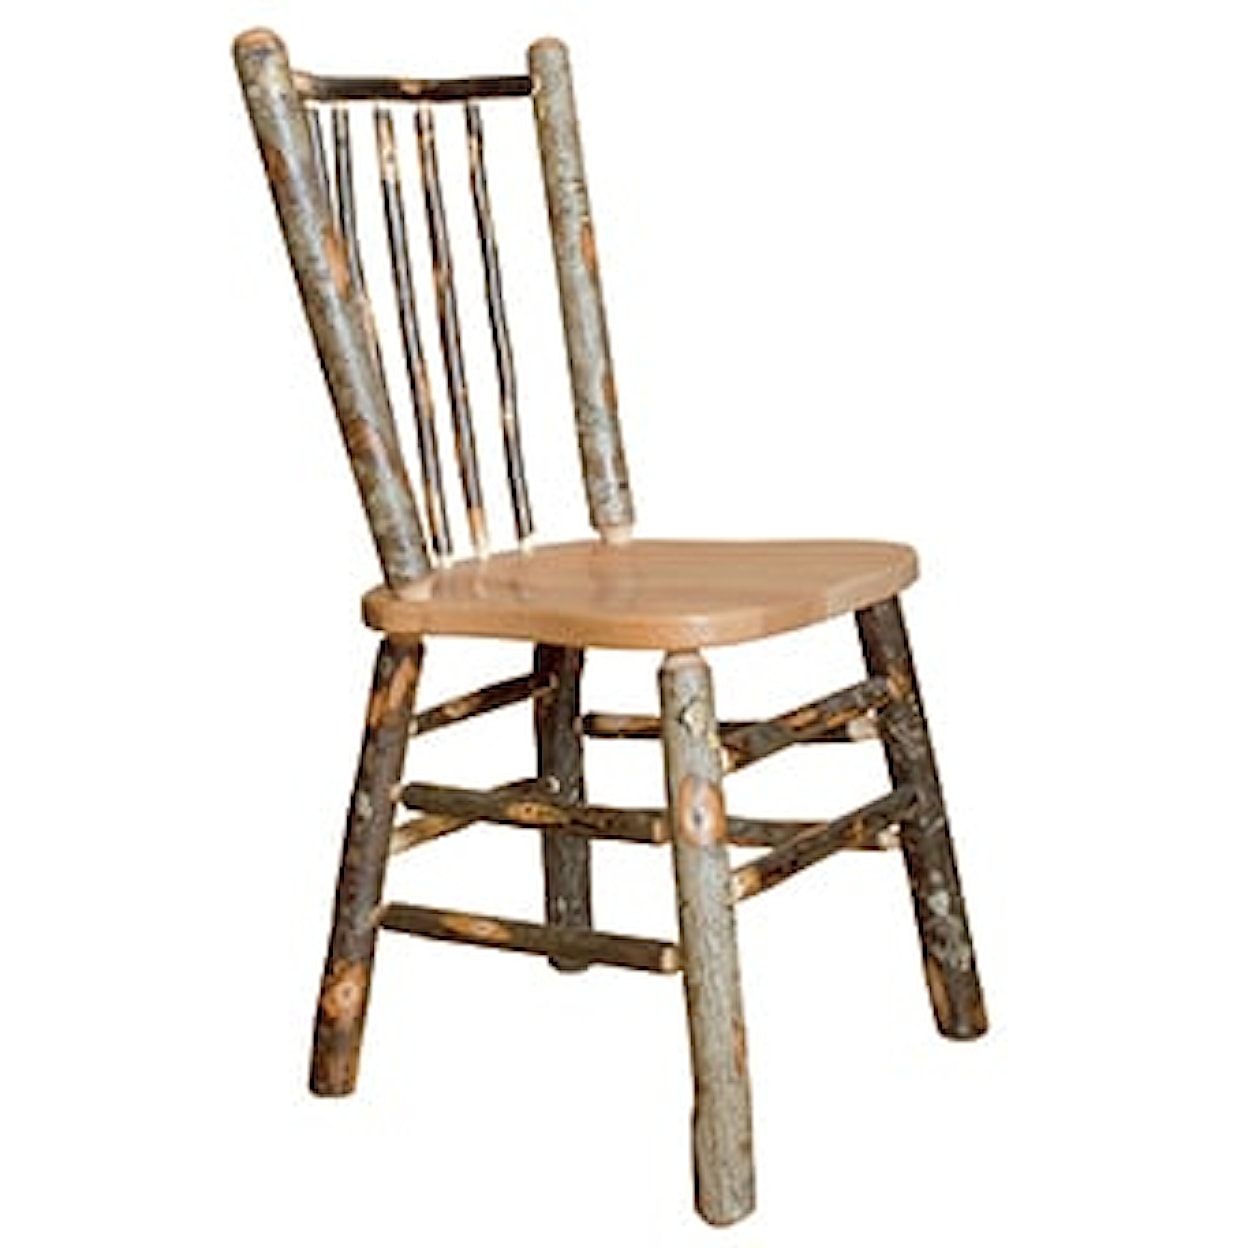 Byler's Rustic Furniture Hickory Collection Stick Back Chair